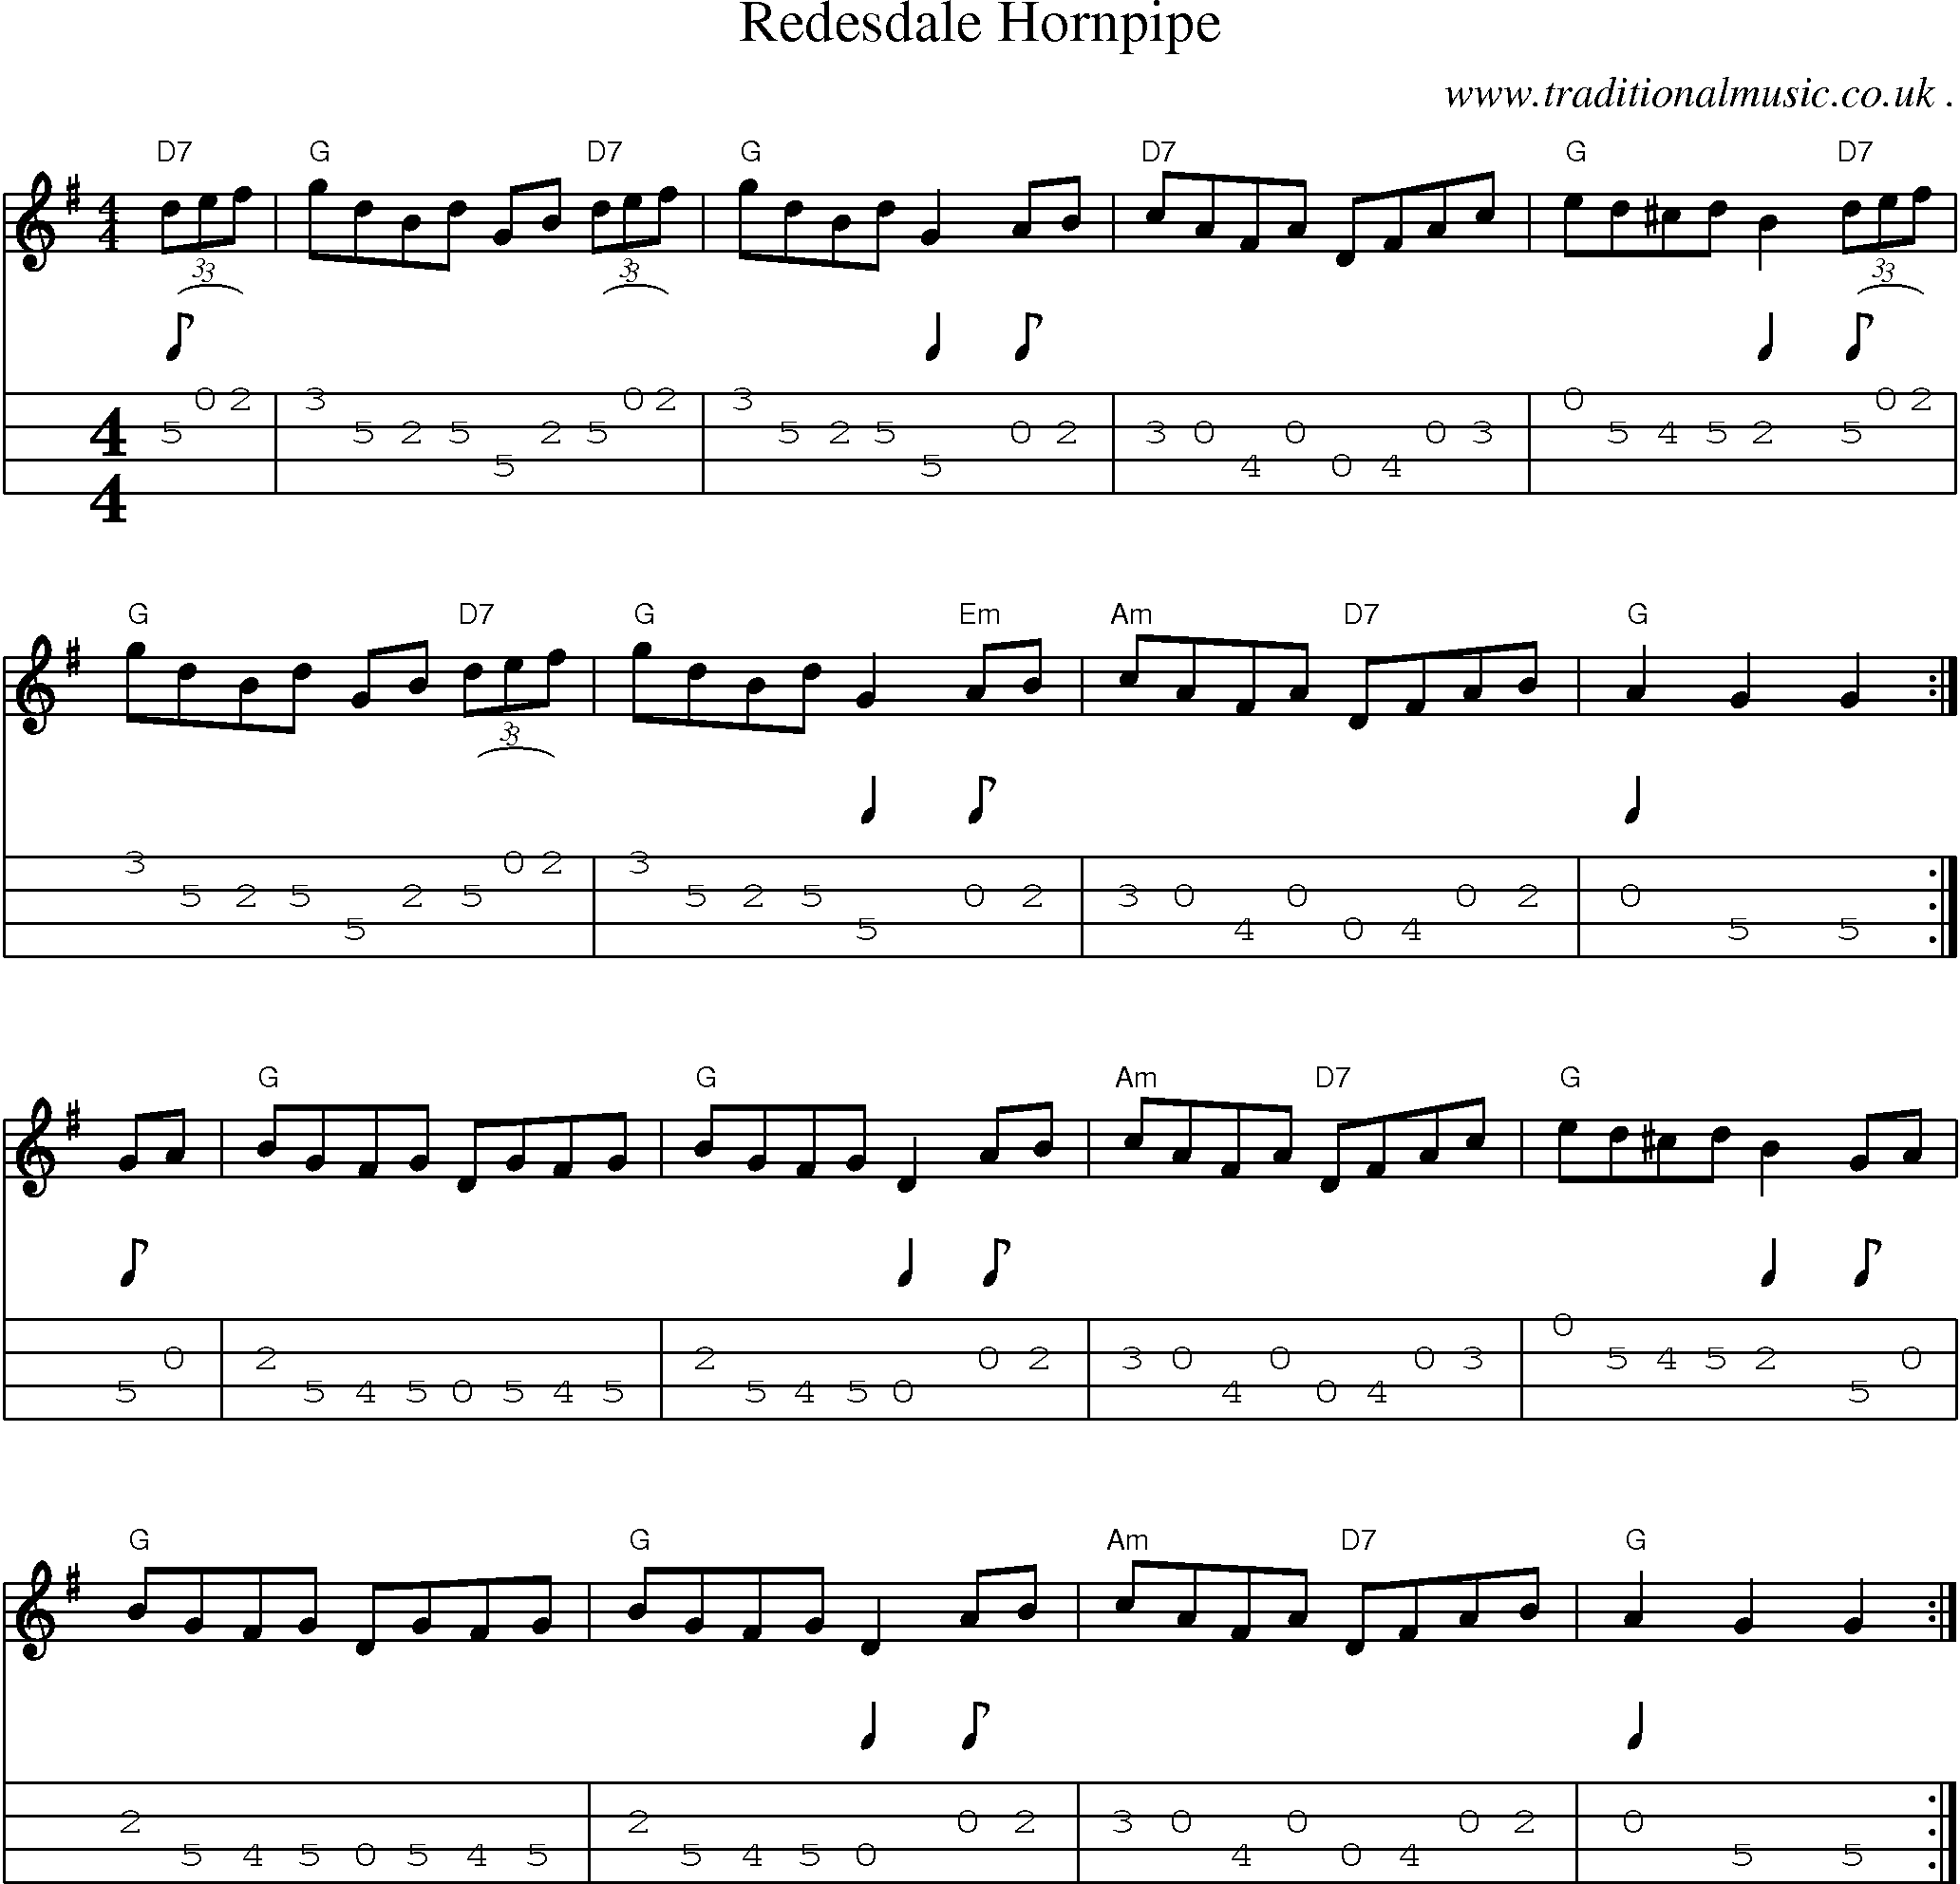 Music Score and Guitar Tabs for Redesdale Hornpipe